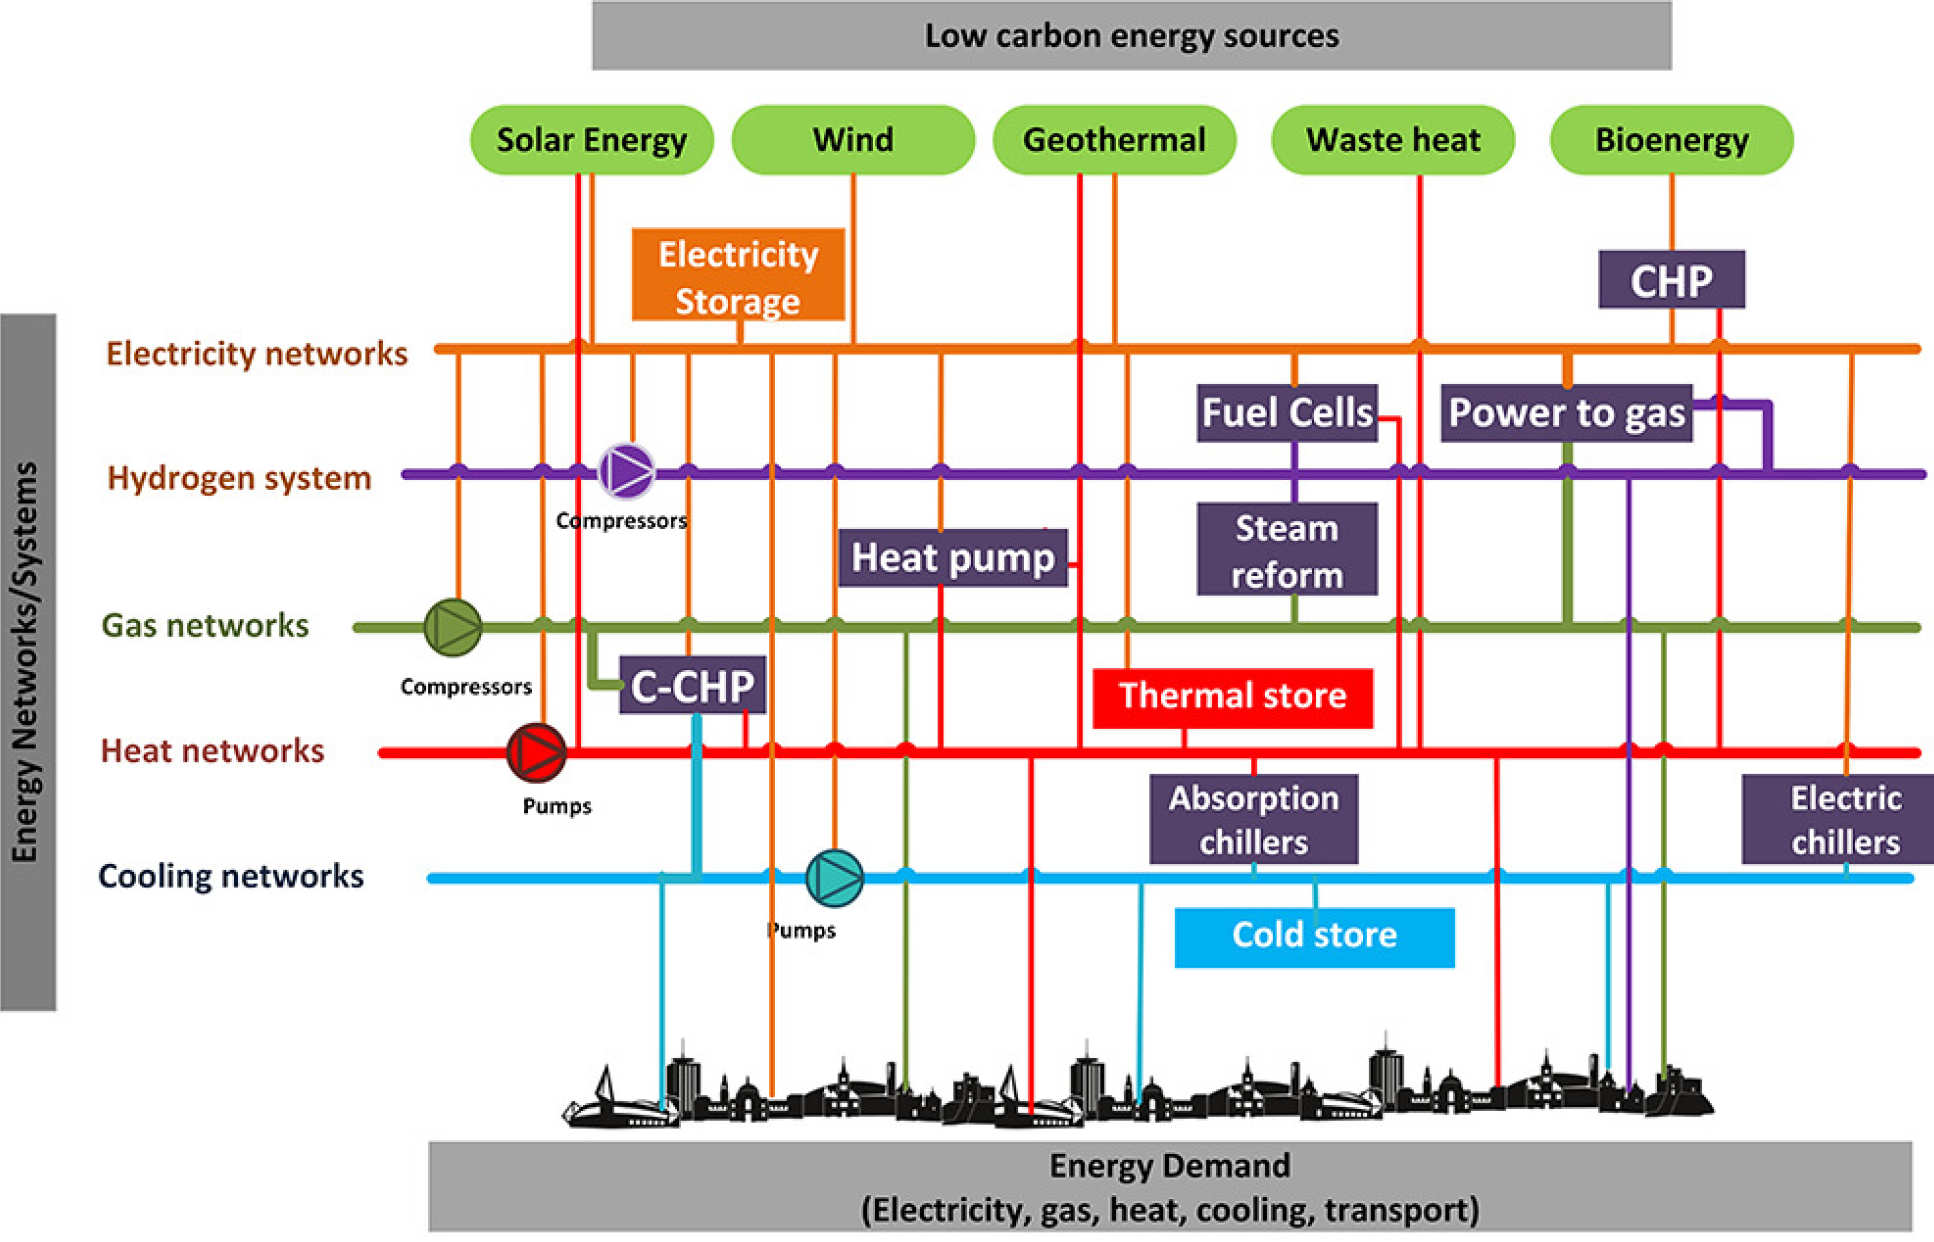 Possible areas for integration between different energy systems